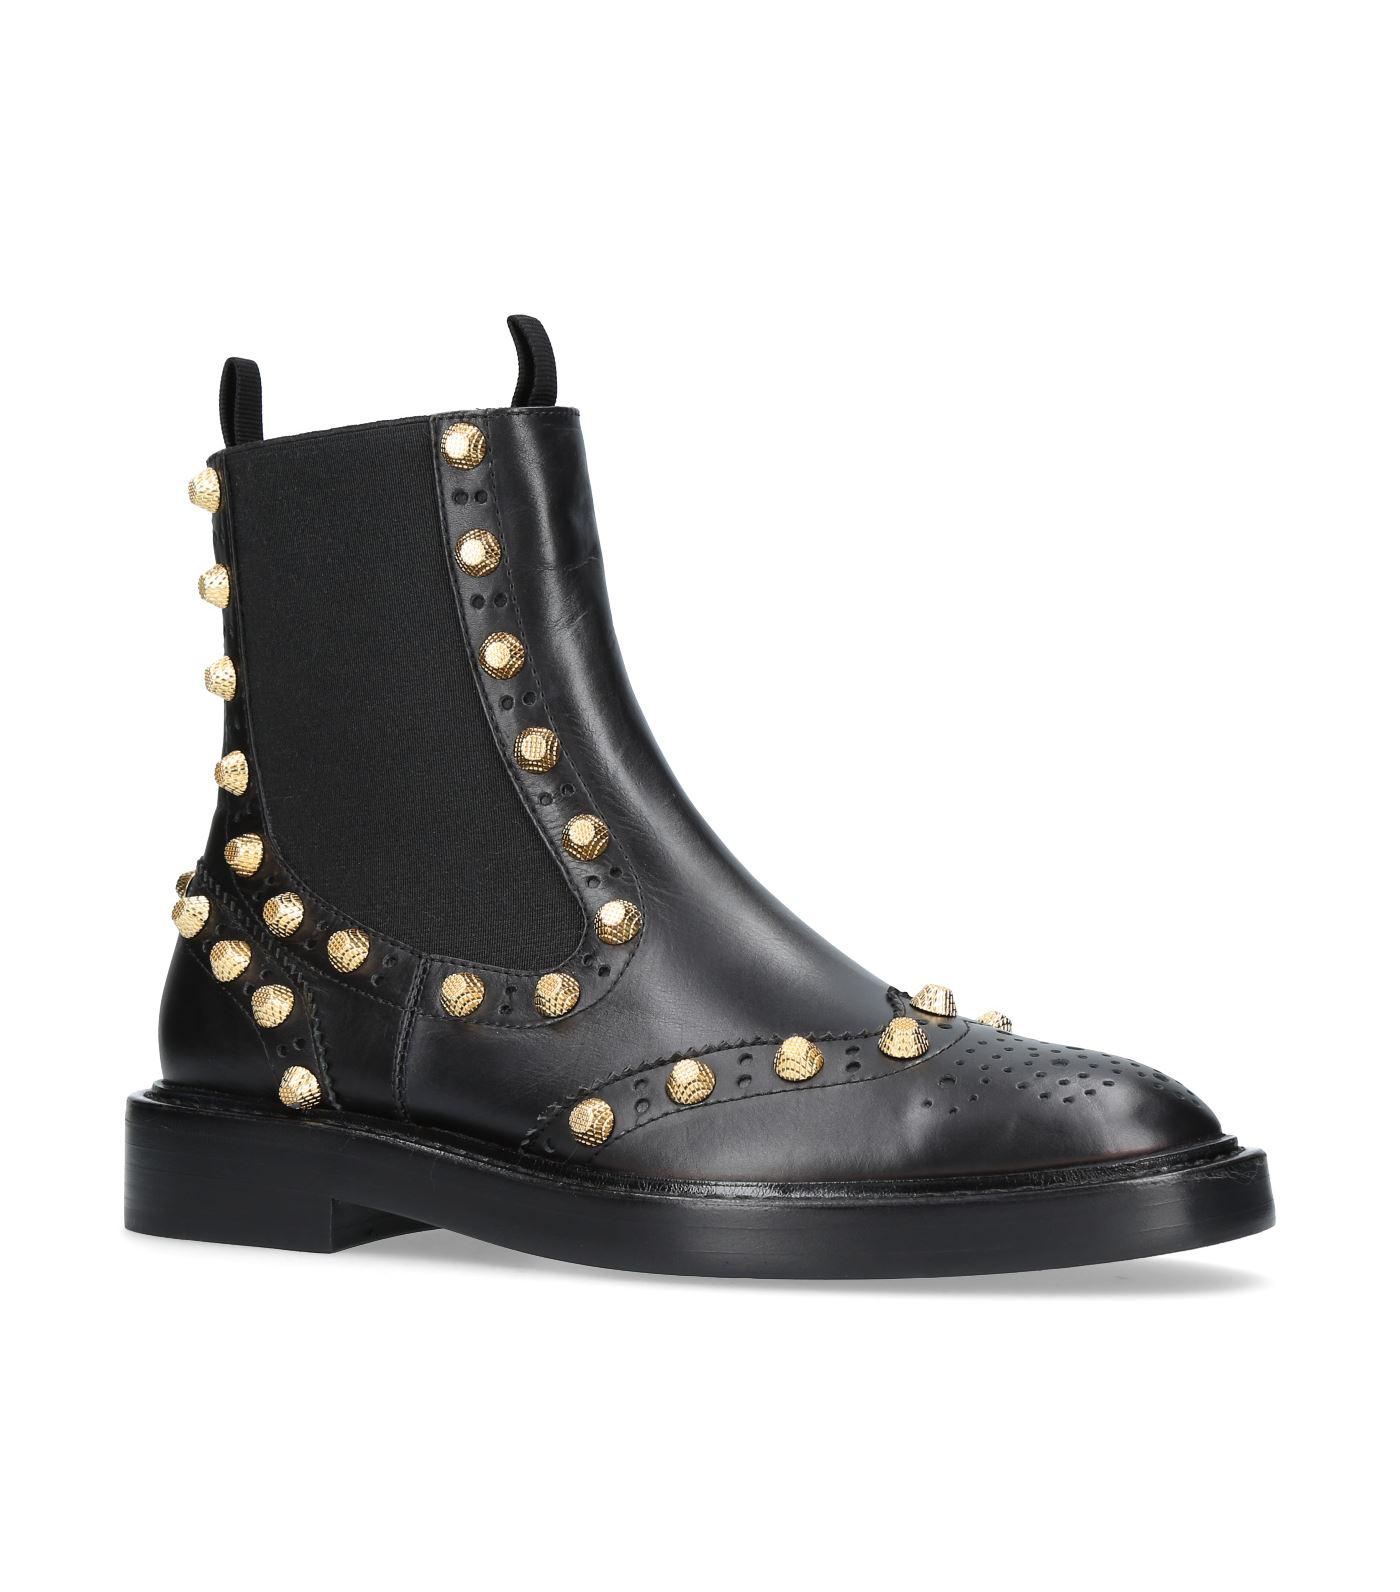 Balenciaga Studded Chelsea Boots in Black - Lyst